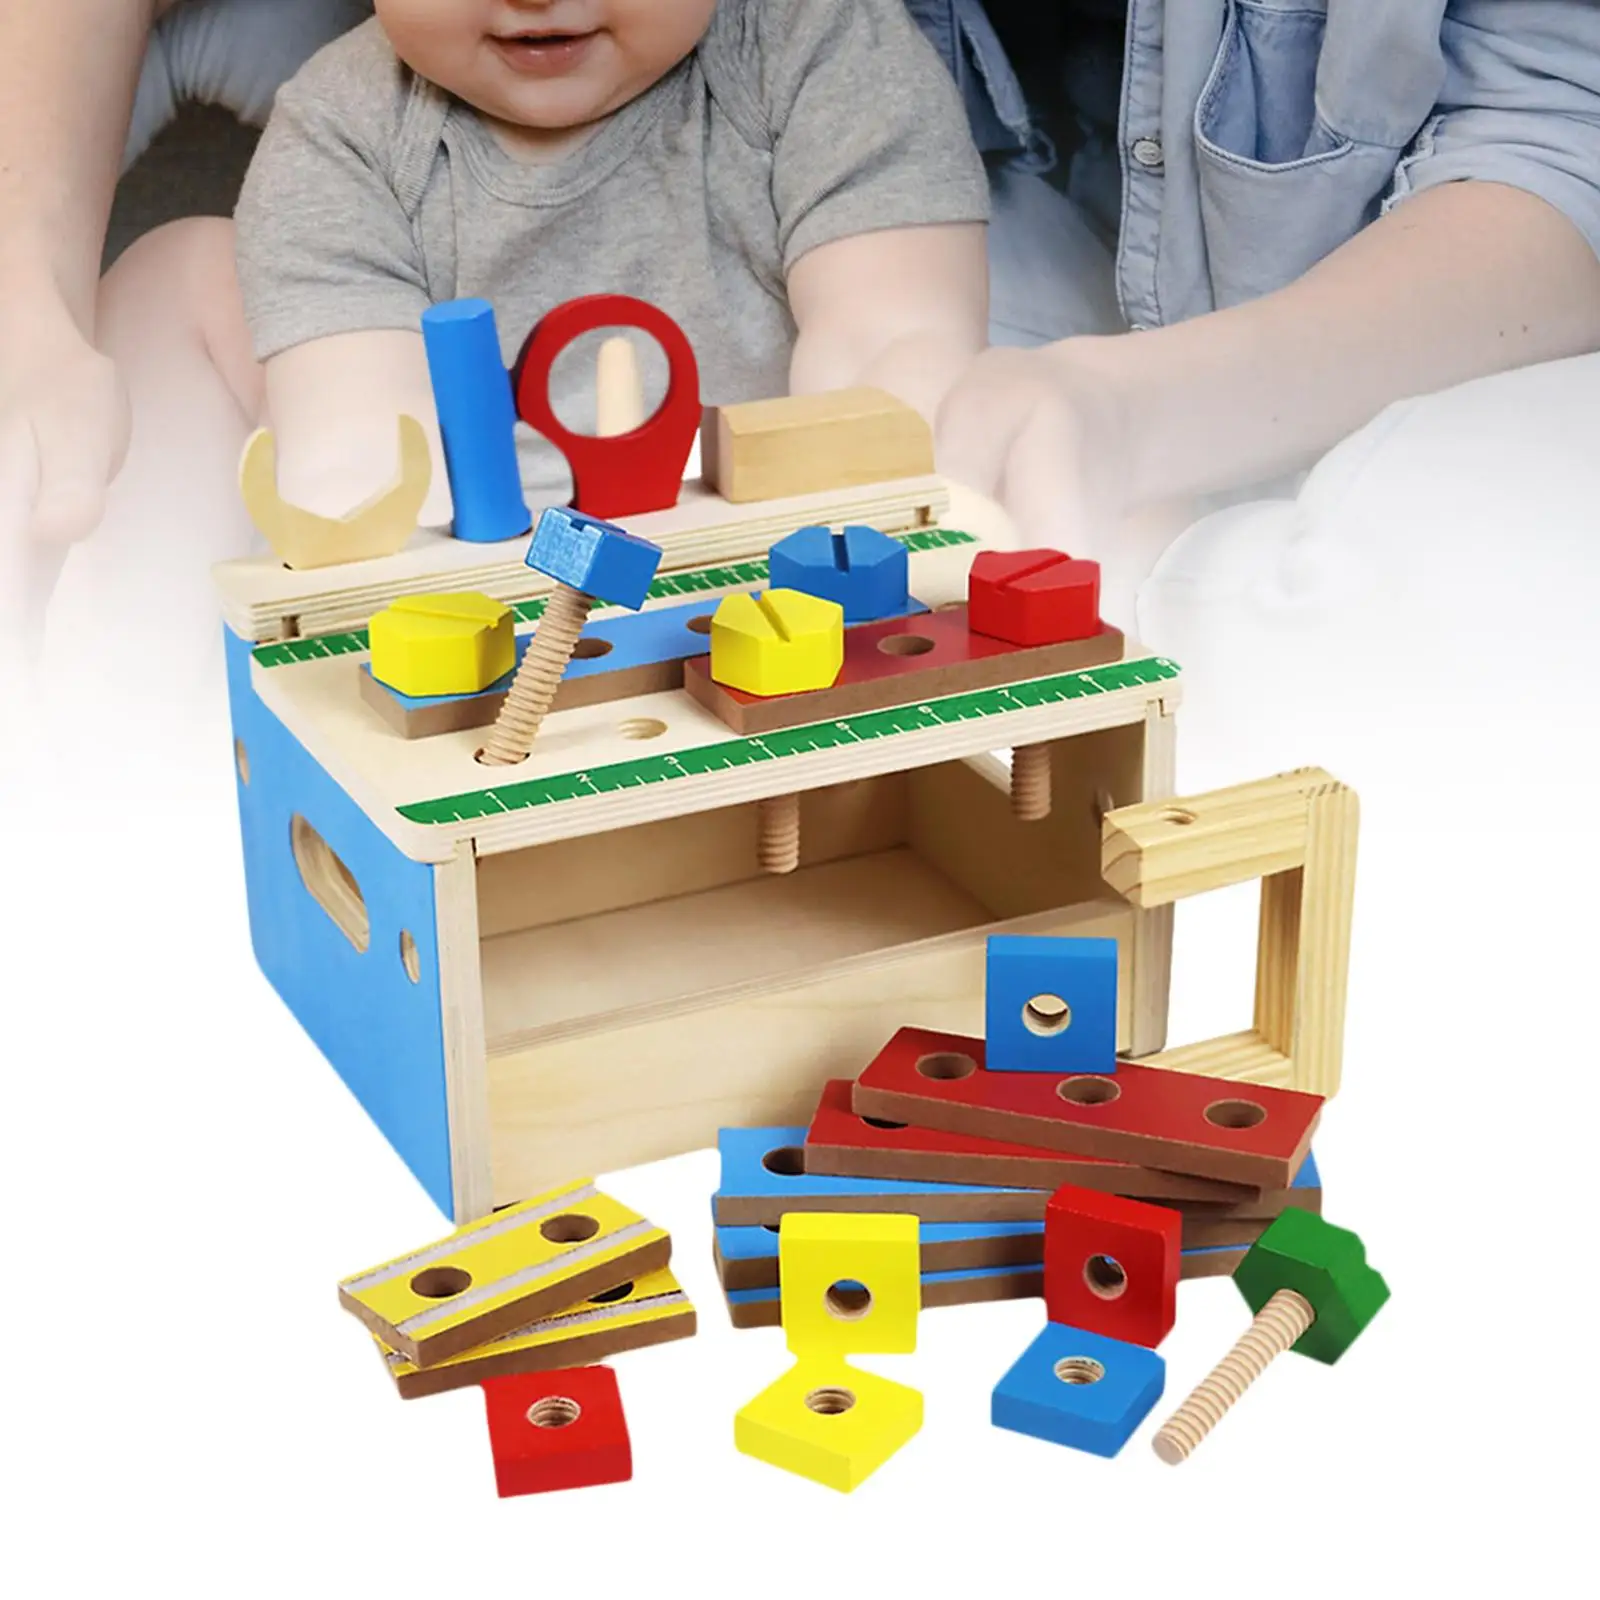 Tool Kit Learning Educational Toy Wooden Construction Toy for Kids